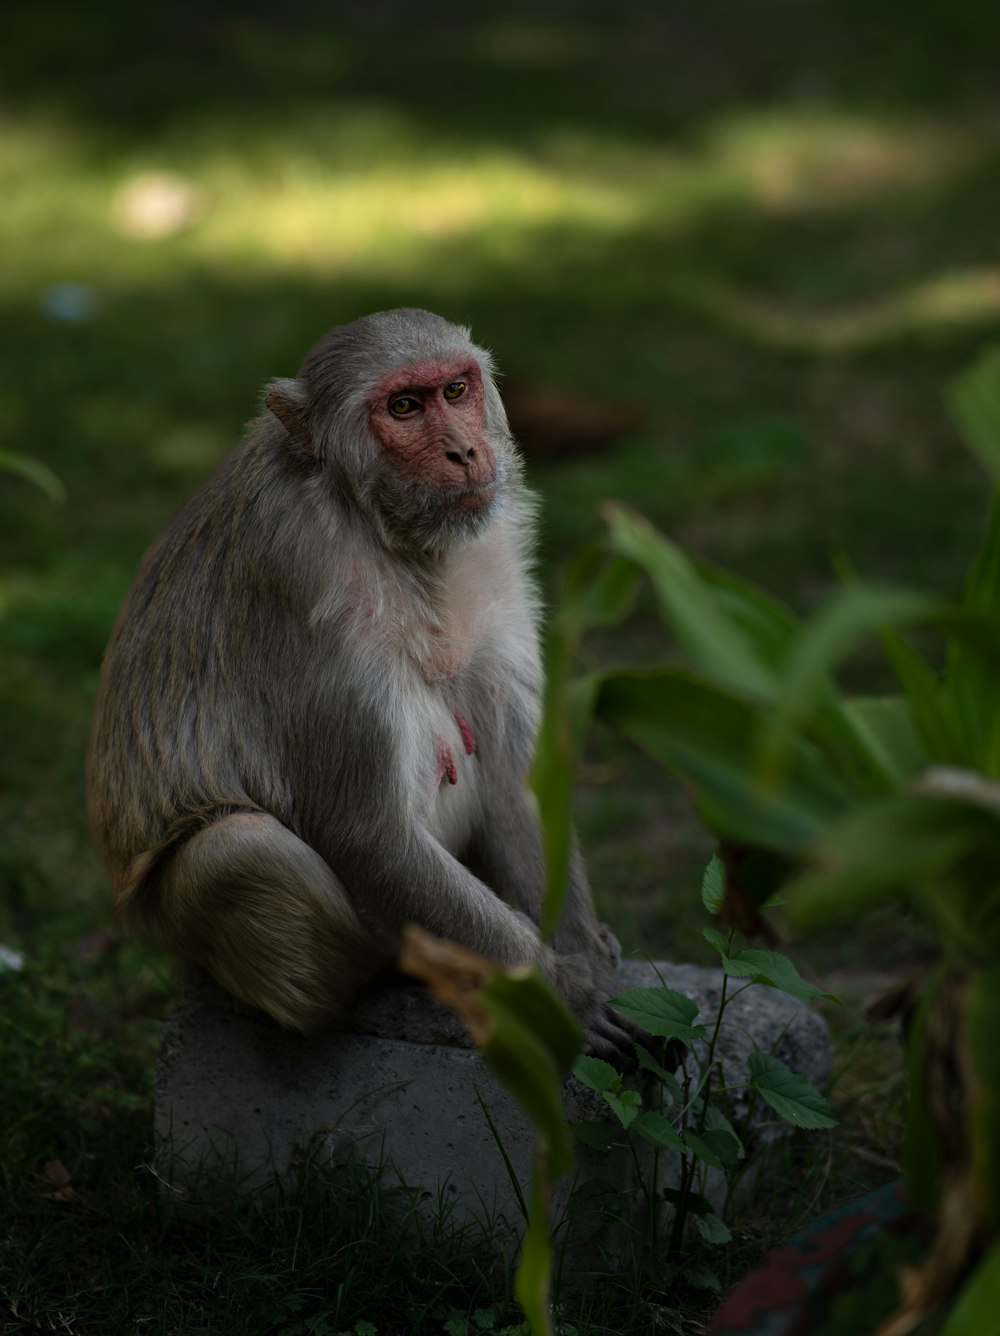 a monkey sitting on a rock in the grass